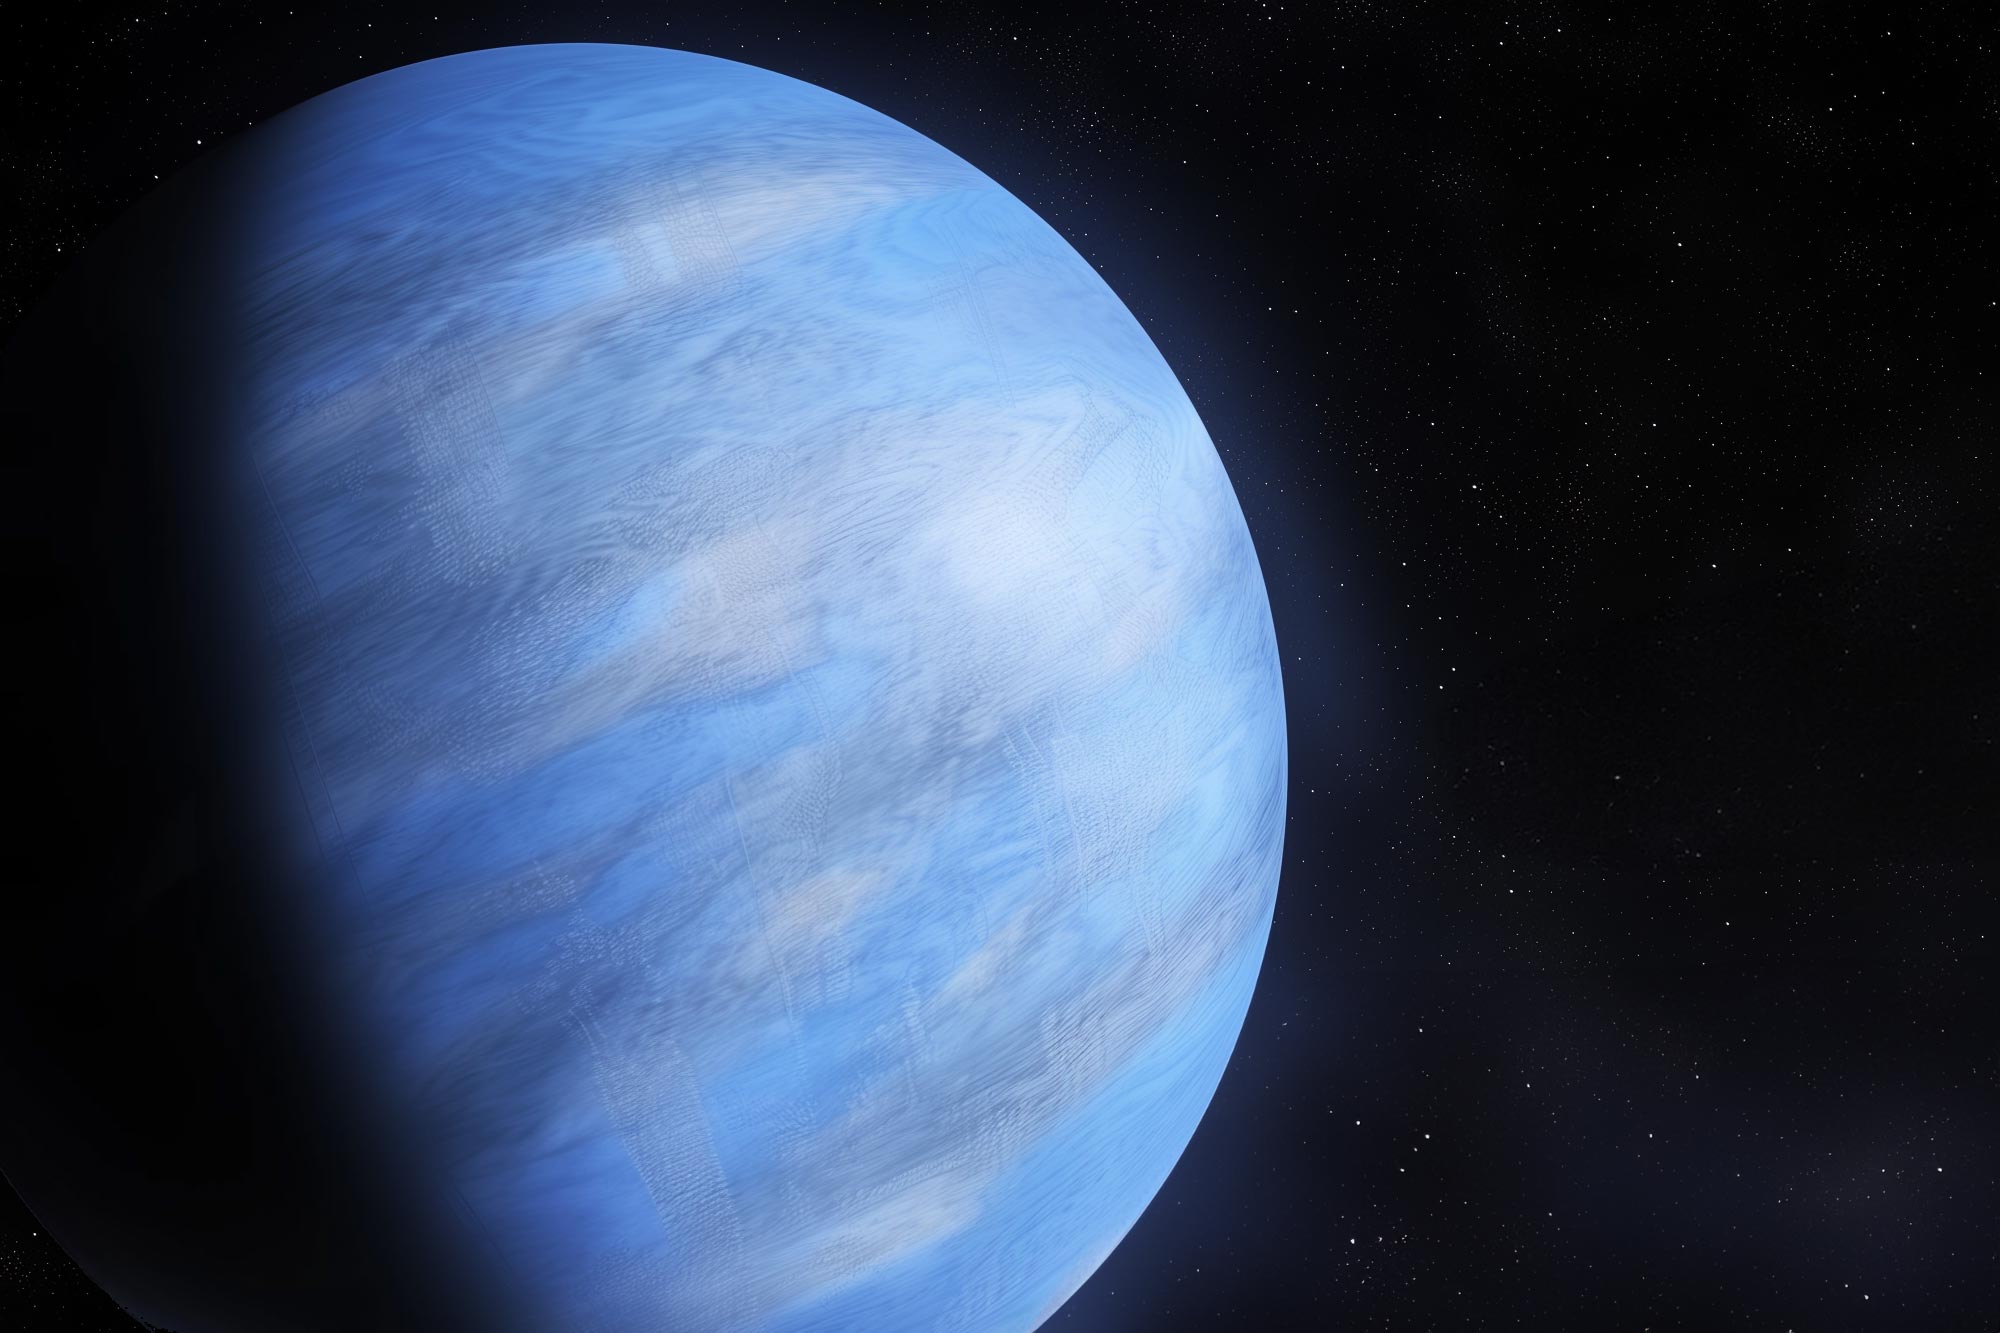 Webb Space Telescope reveals case of puffy exoplanet ‘Marshmallow Microwave’.